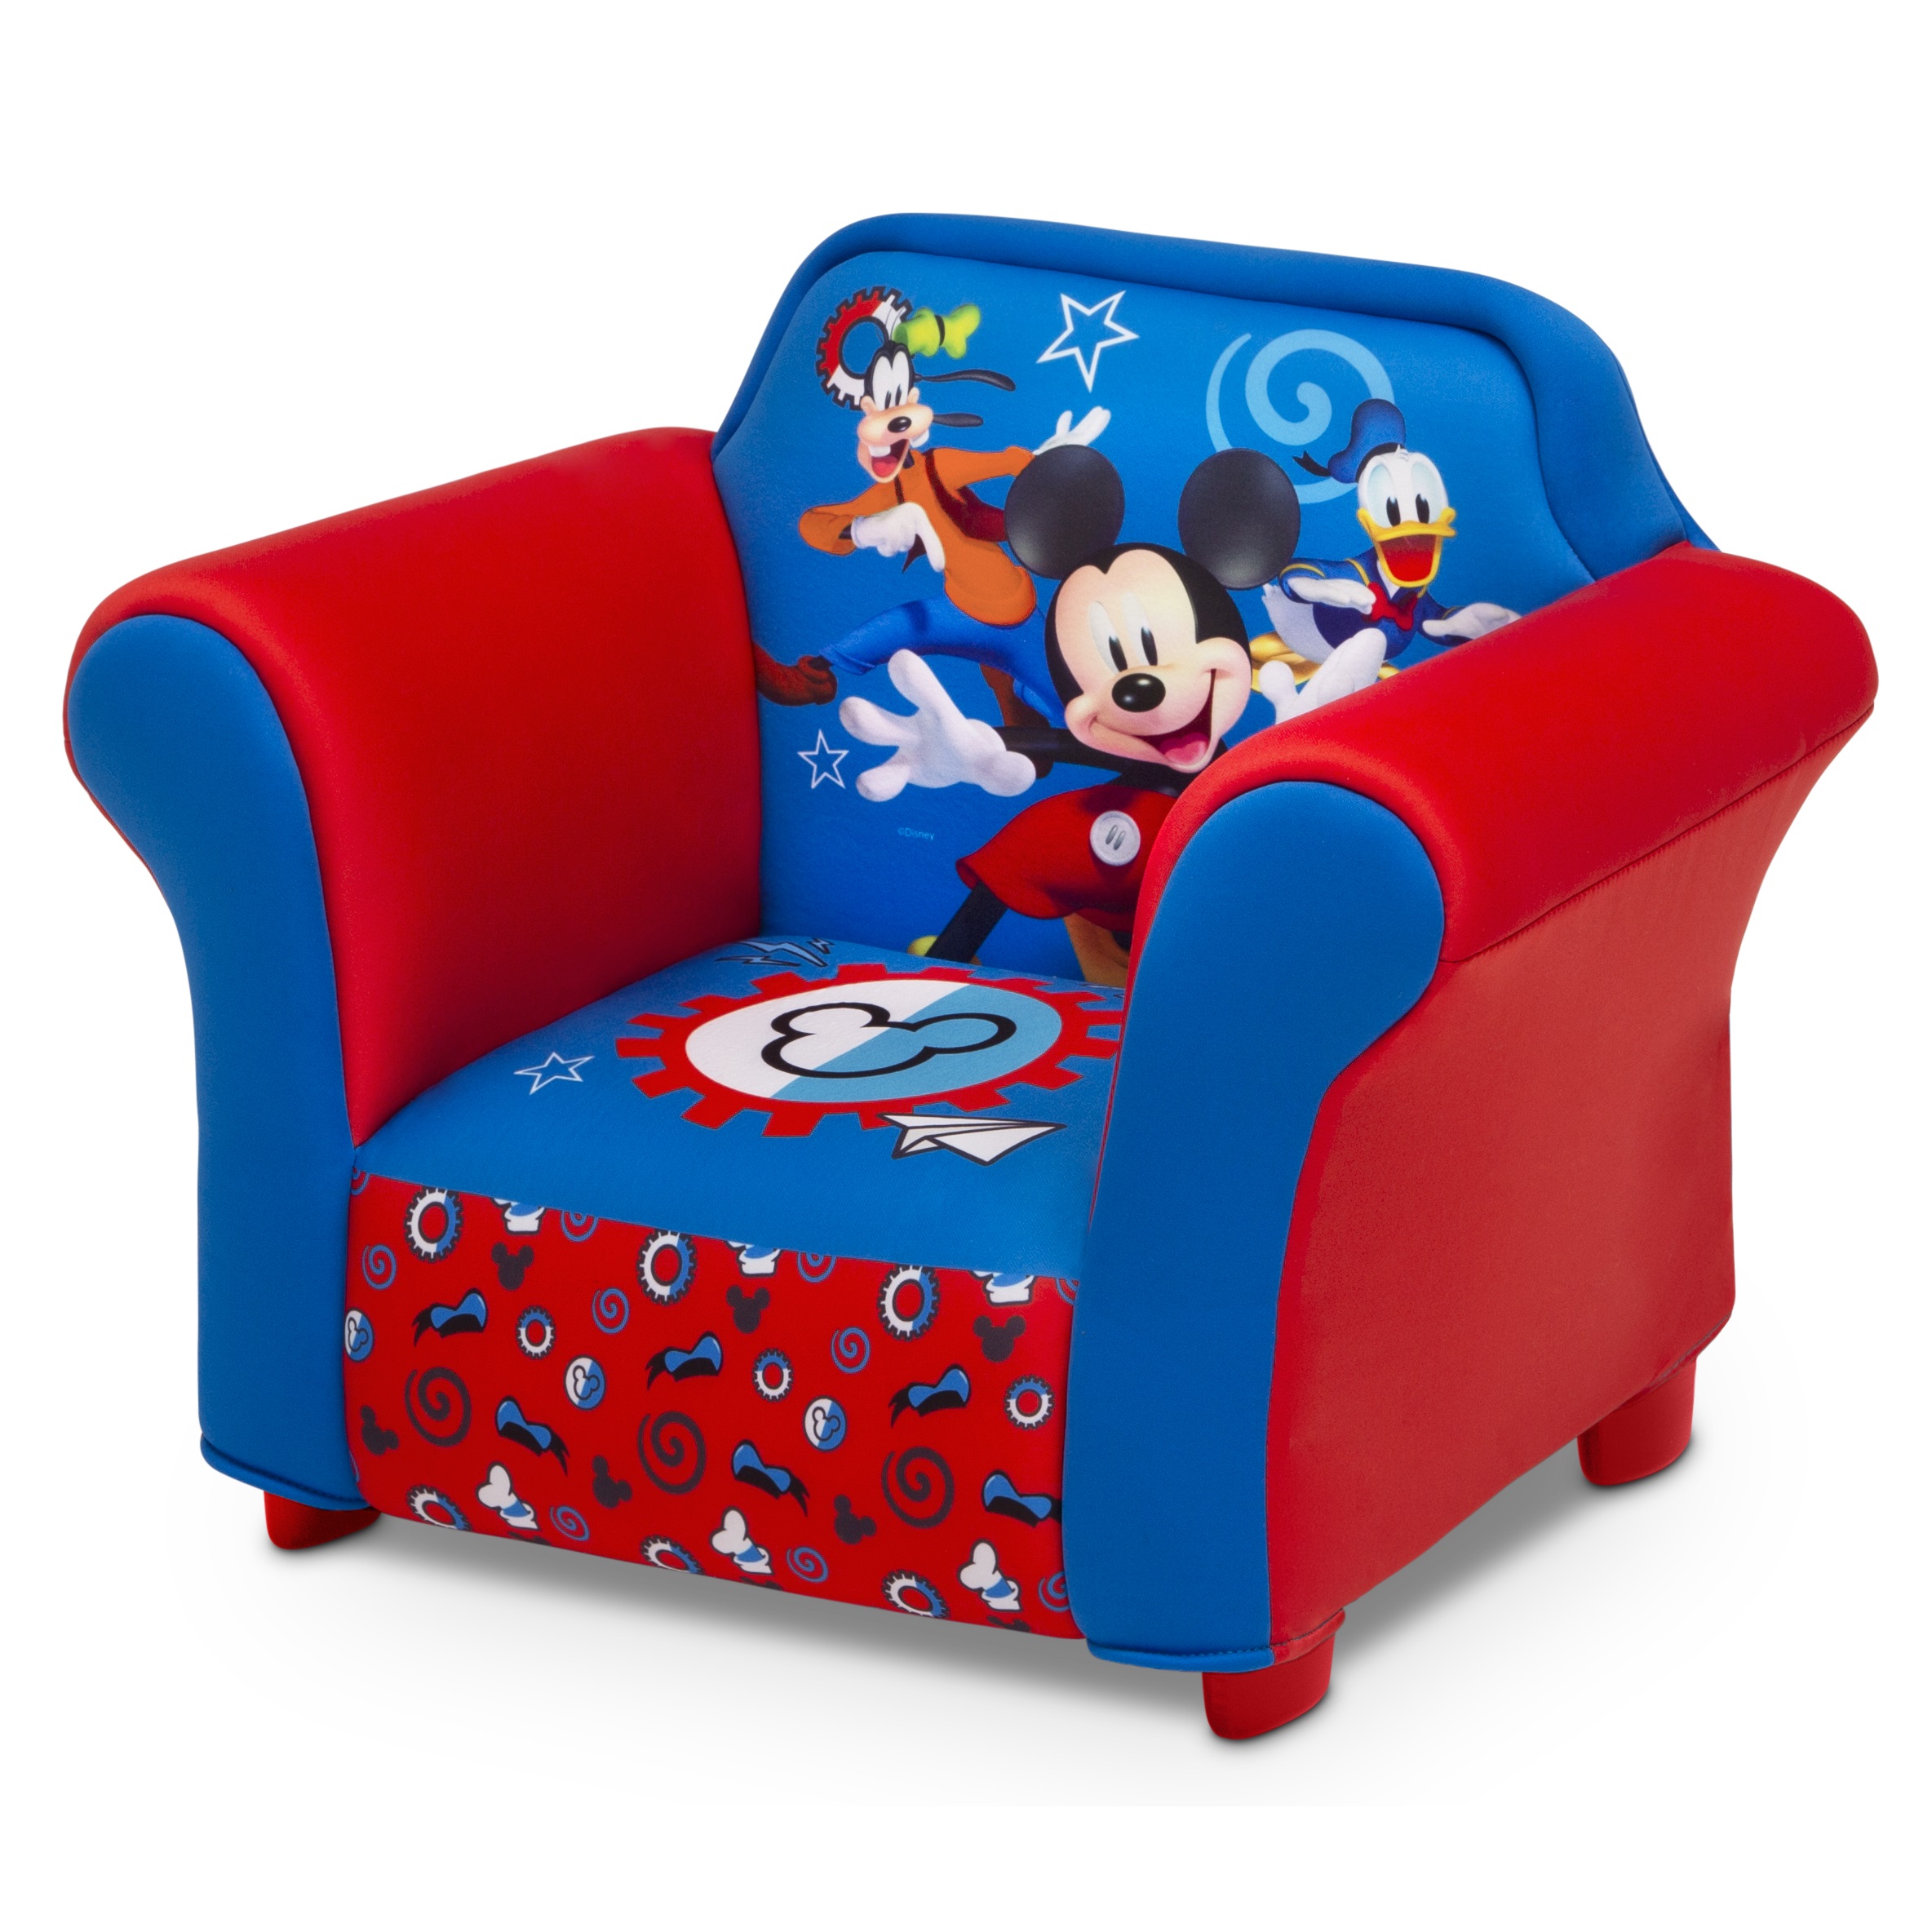 Disney Mickey Mouse Kids Upholstered Chair with Sculpted Plastic Frame by Delta Children - image 5 of 6